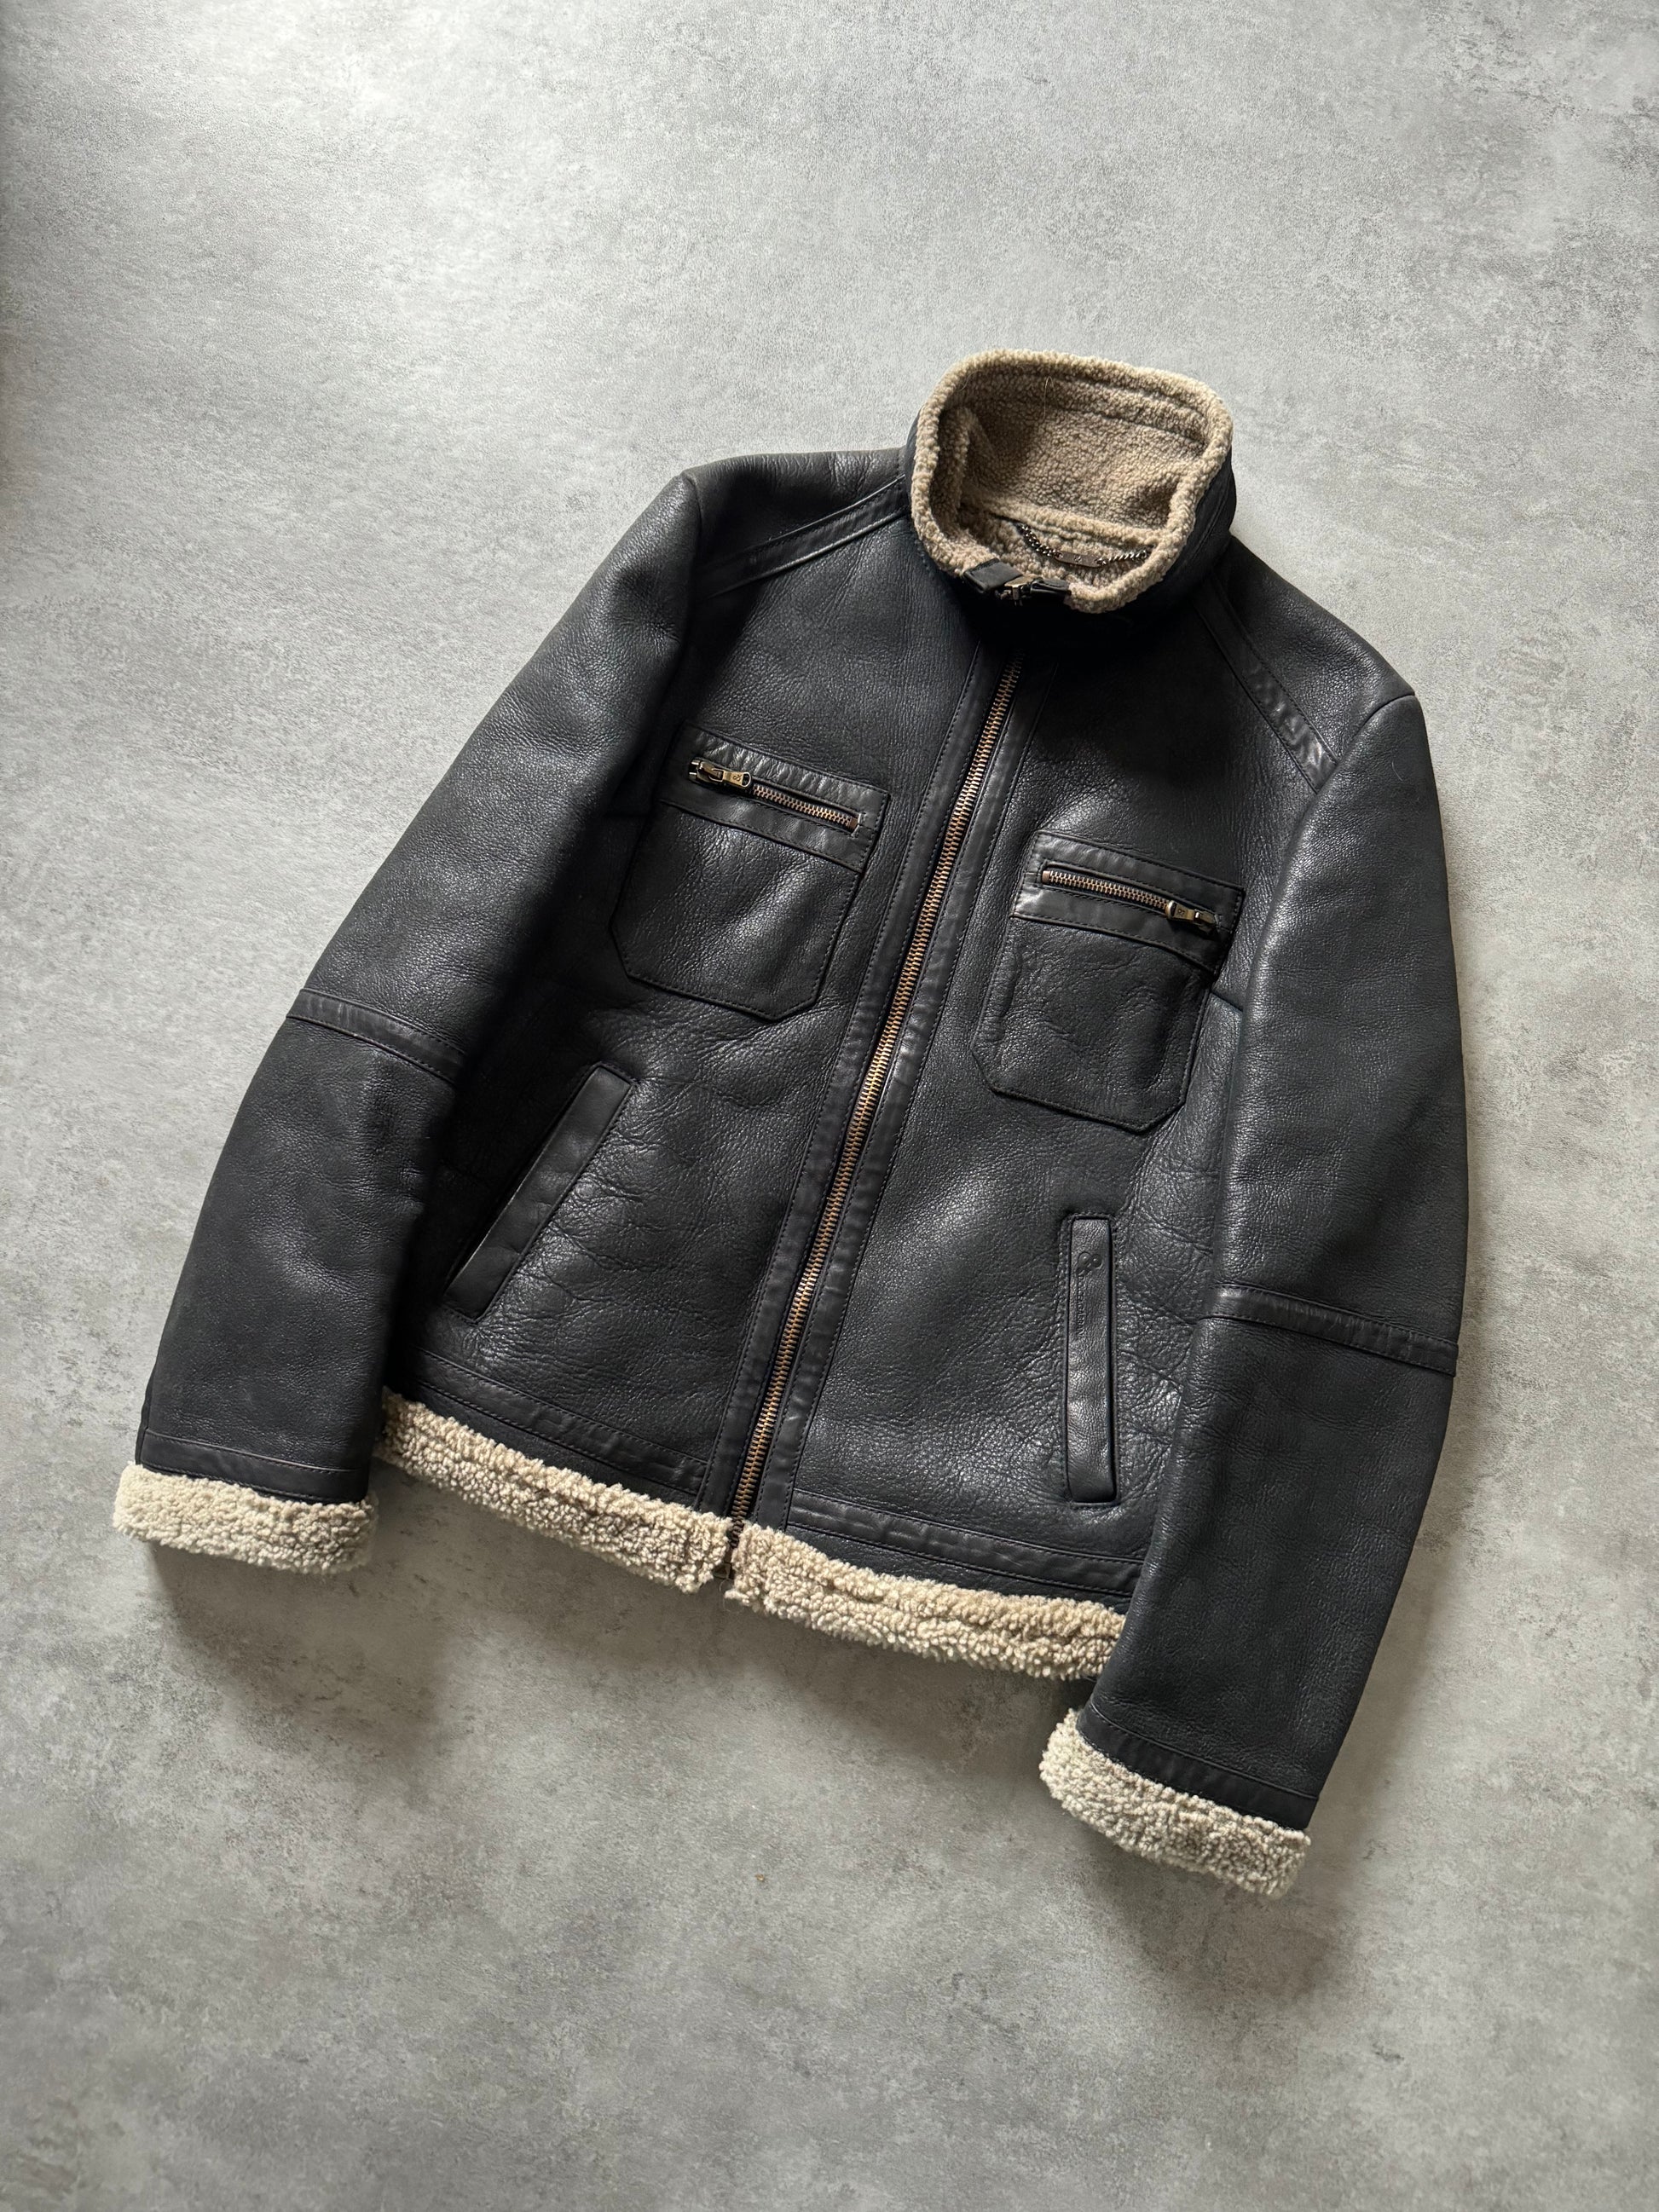 1990s Dolce & Gabbana Shearling Leather Jacket  (S) - 4